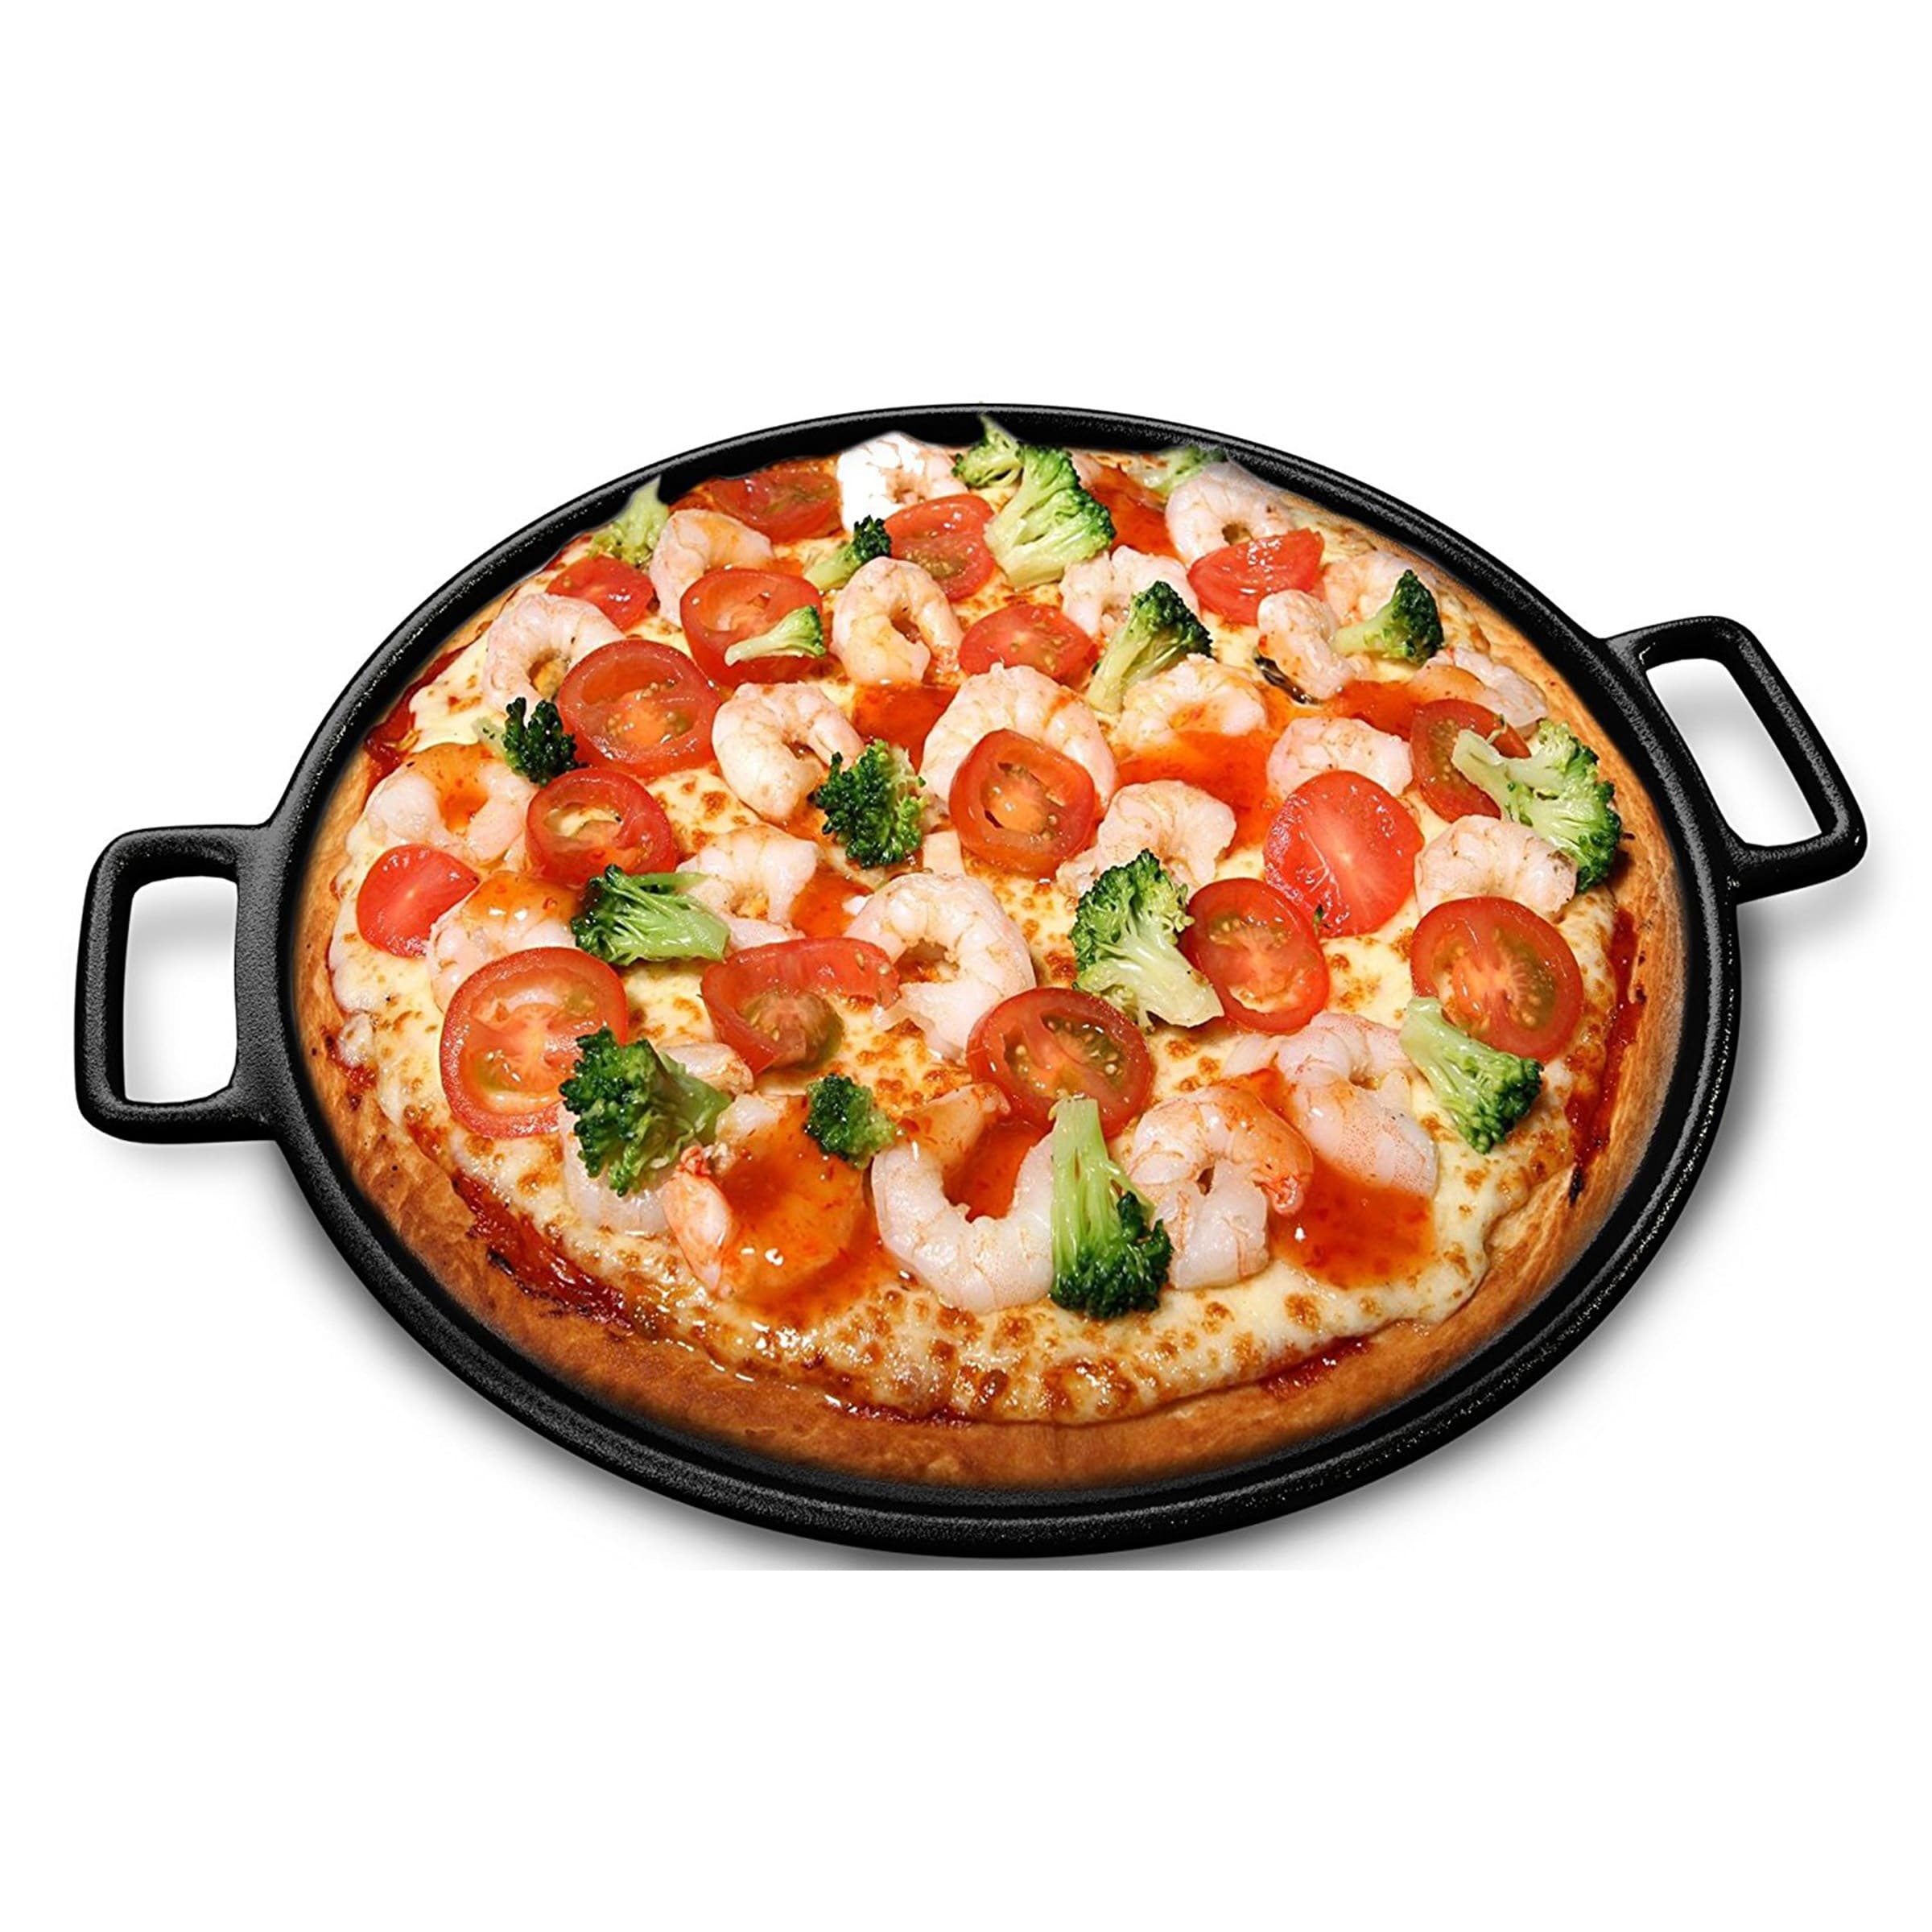 https://ak1.ostkcdn.com/images/products/is/images/direct/28b66a4bef0024d400856809292e4317fc4974b3/Cast-Iron-Pizza-Pan-14%E2%80%9D-Skillet-for-Cooking%2C-Baking%2C-Grilling-Durable-Home-Complete.jpg